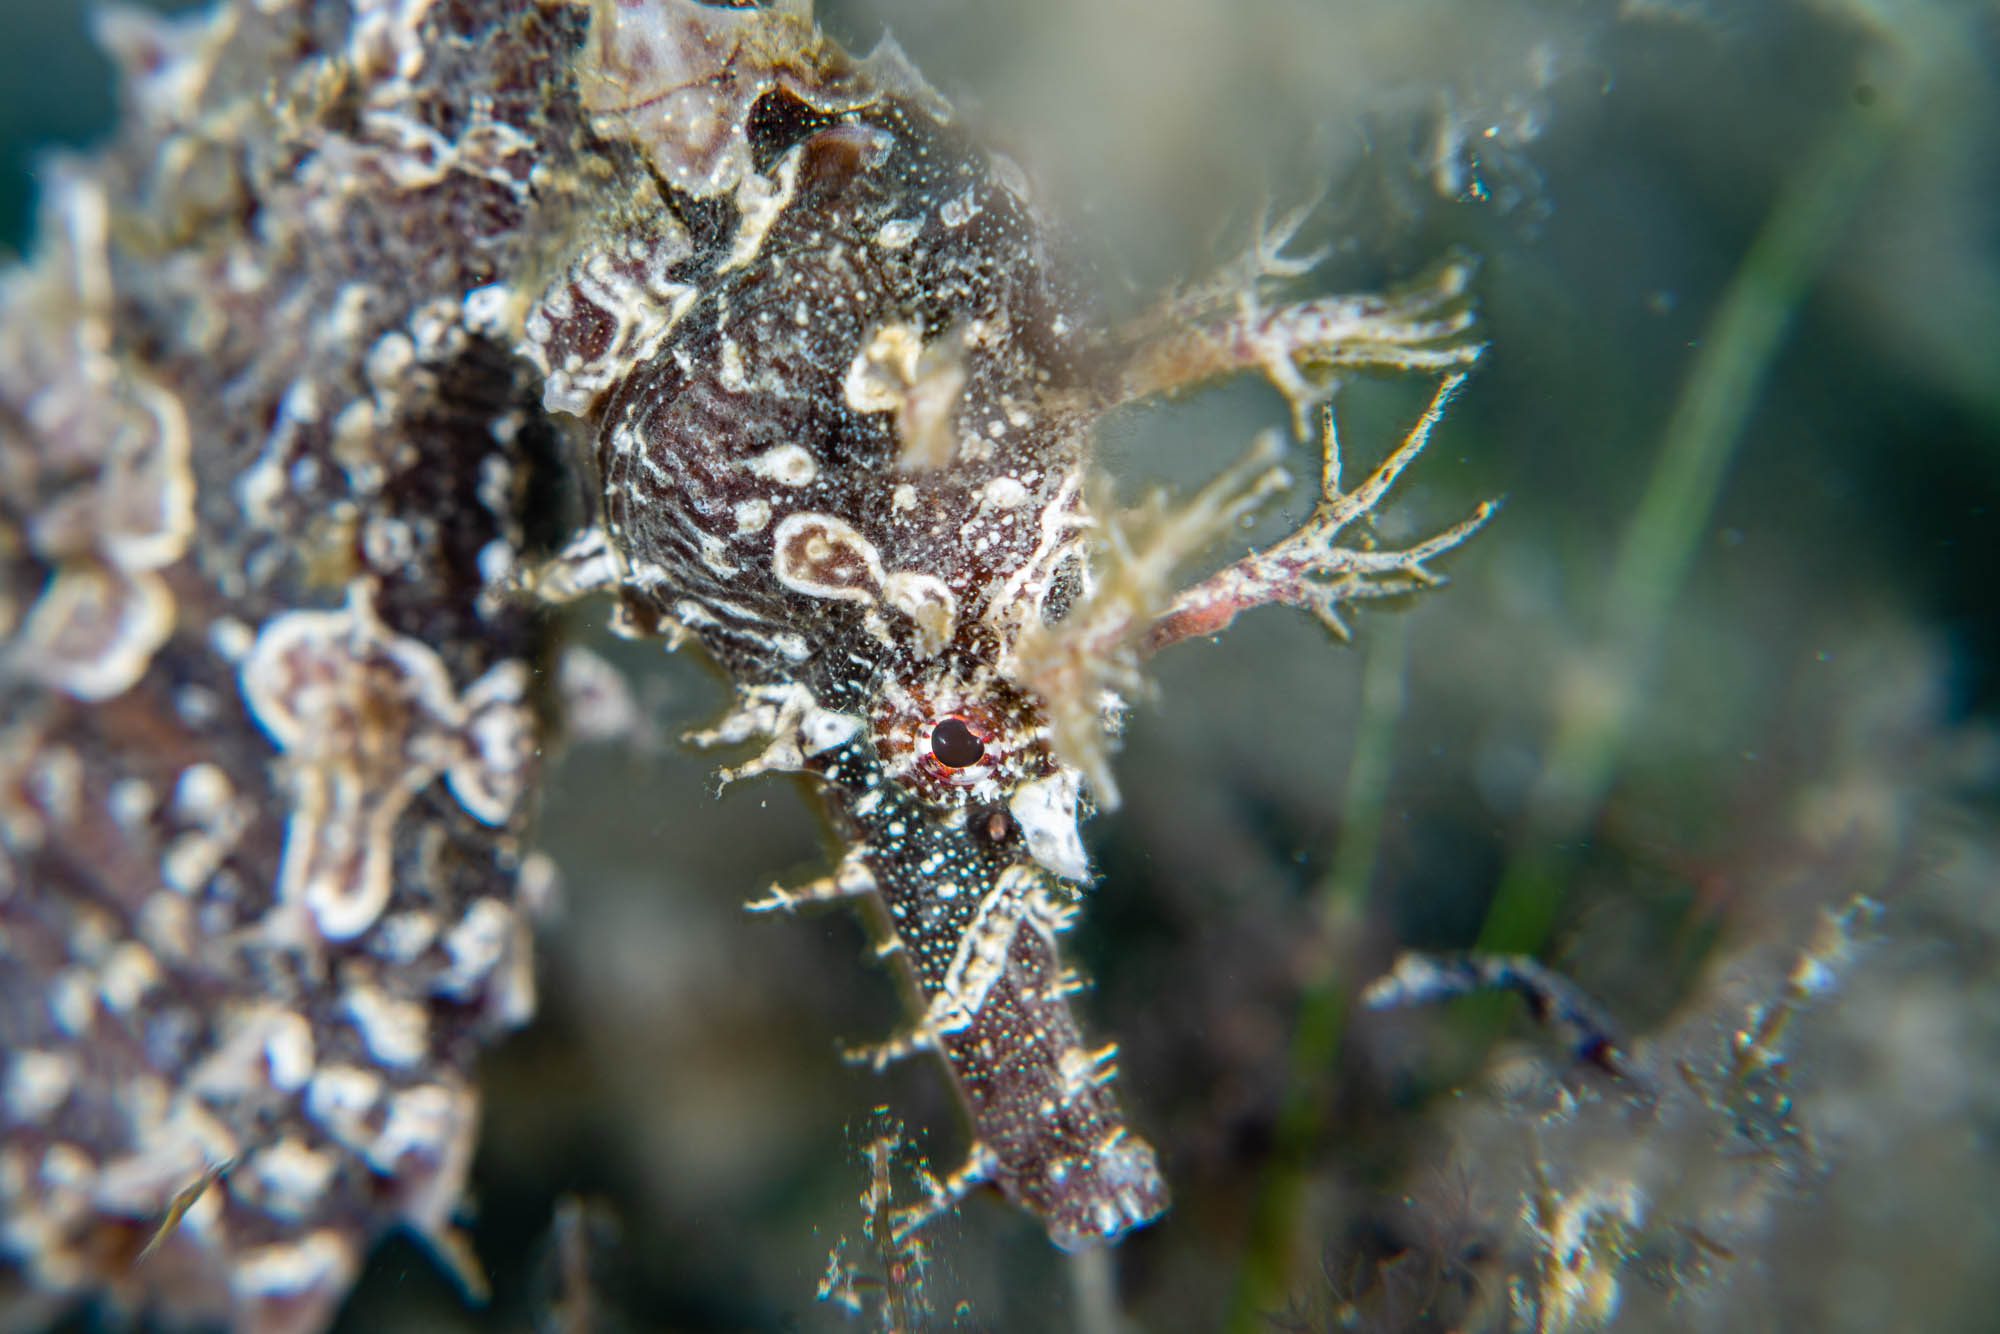 The image shows a camouflaged marine creature, likely a seahorse or pipefish, amidst underwater vegetation, displaying intricate patterns and muted colors for disguise.